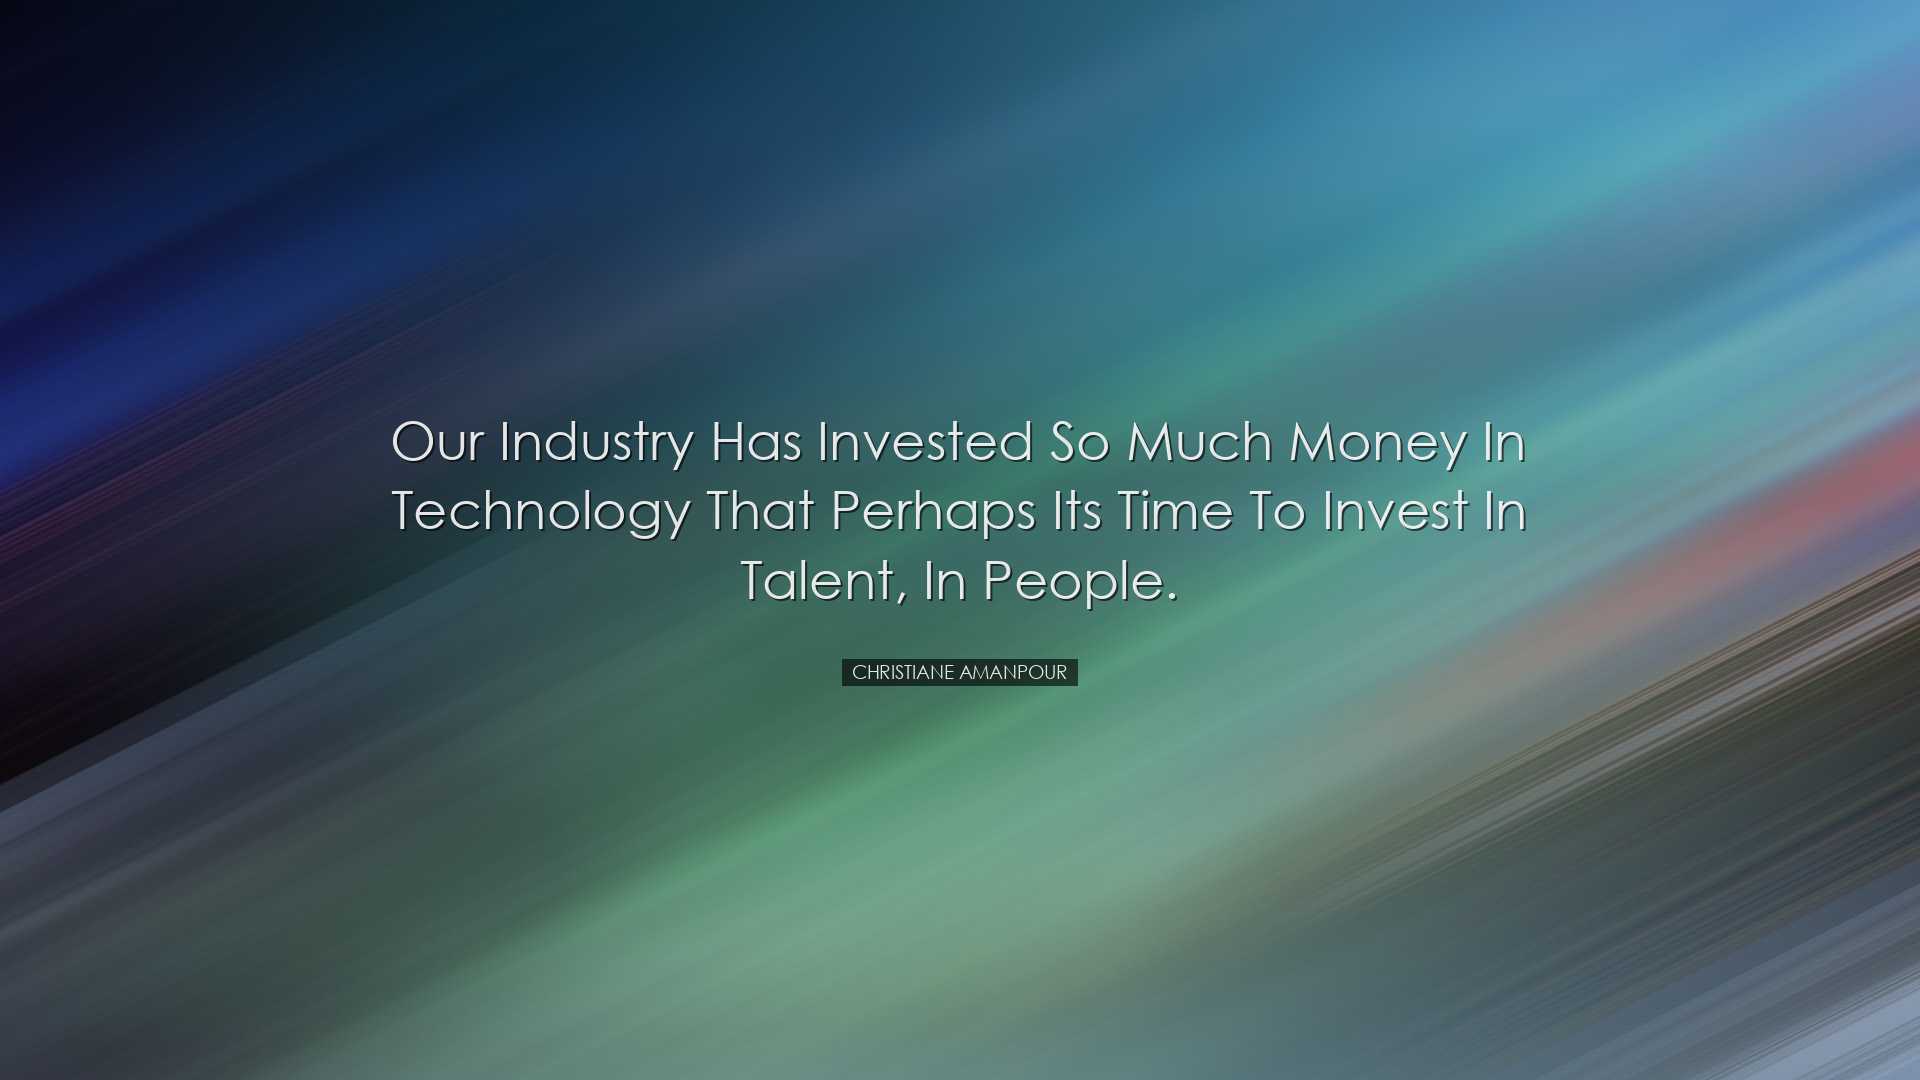 Our industry has invested so much money in technology that perhaps